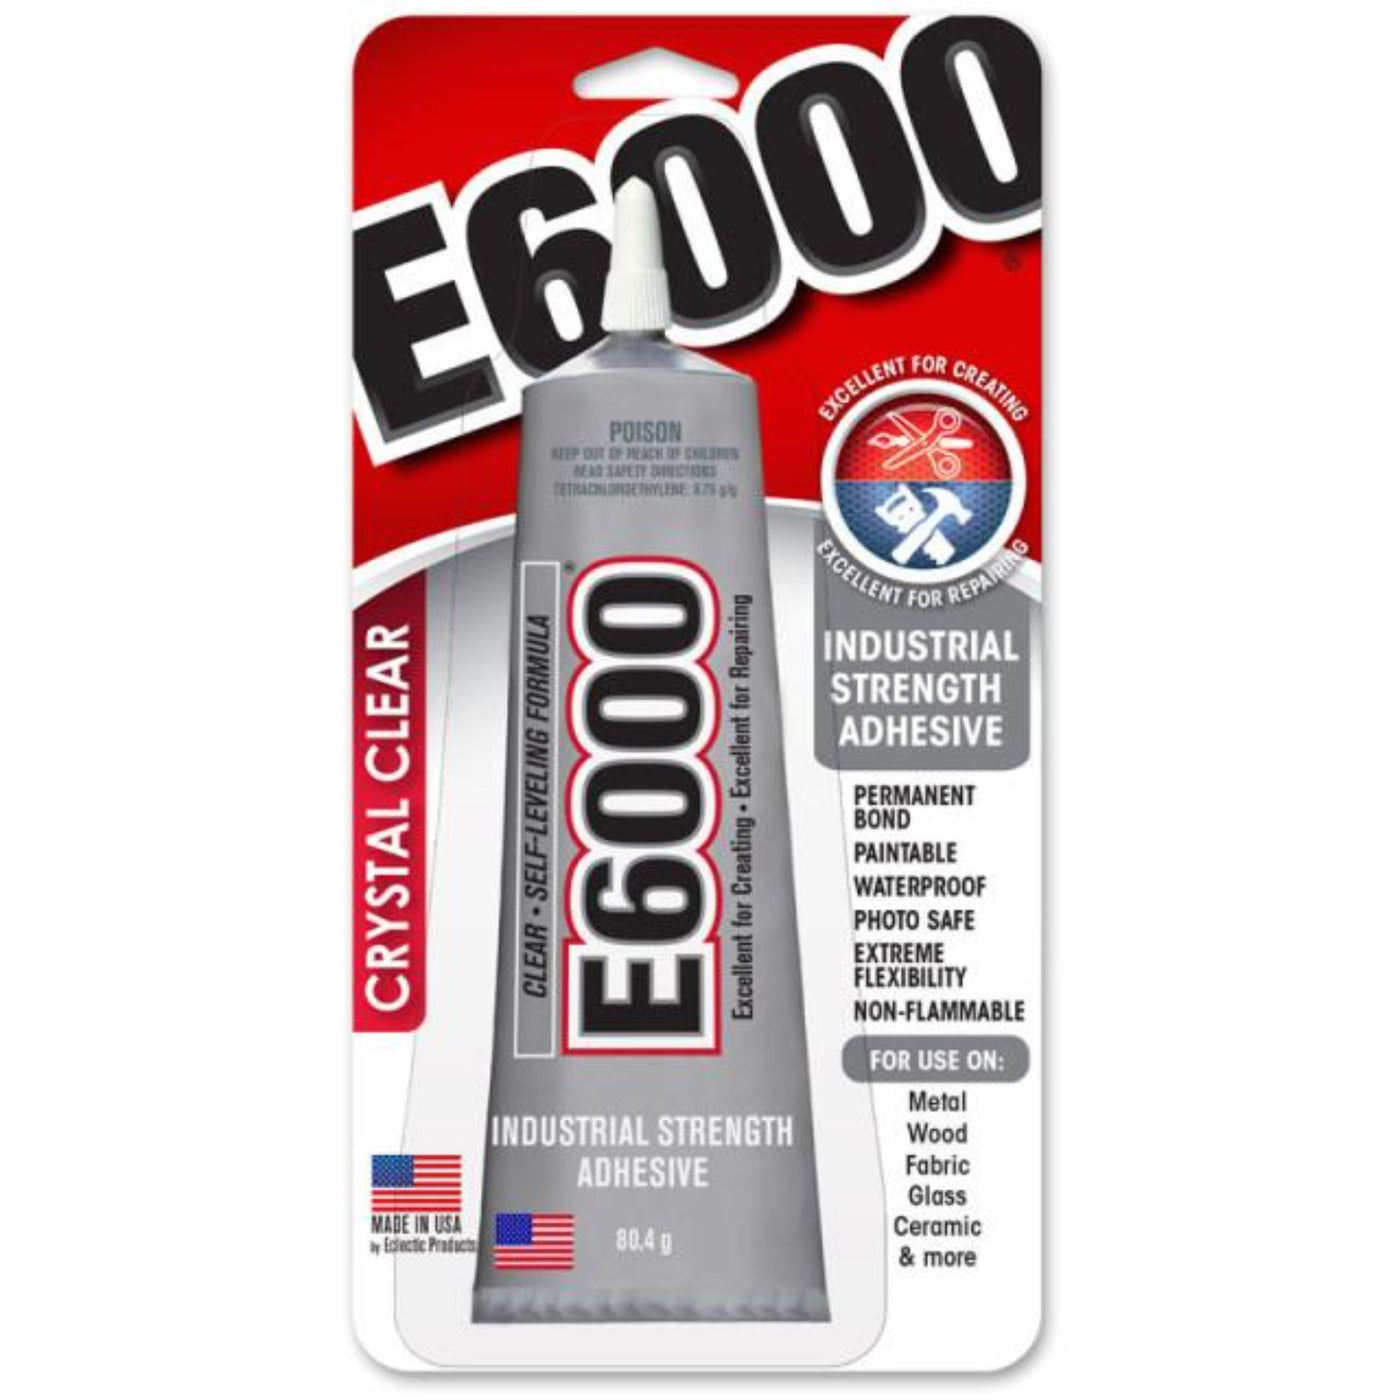 E6000 Clear Adhesive Industrial Strength - 80.4g 2oz (road freight only, no international orders)